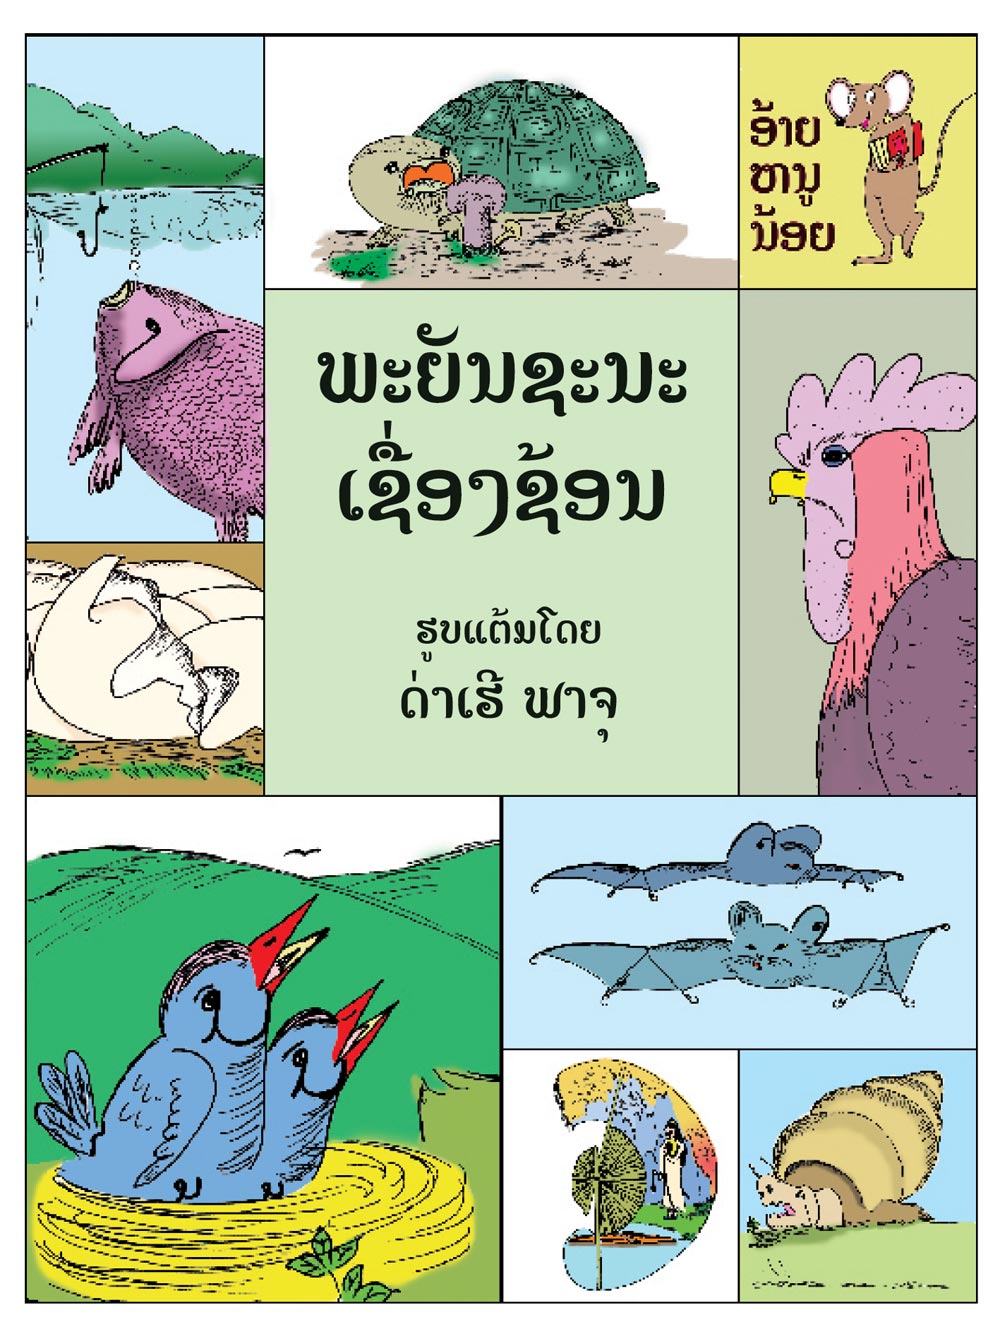 Hidden Alphabet large book cover, published in Lao language